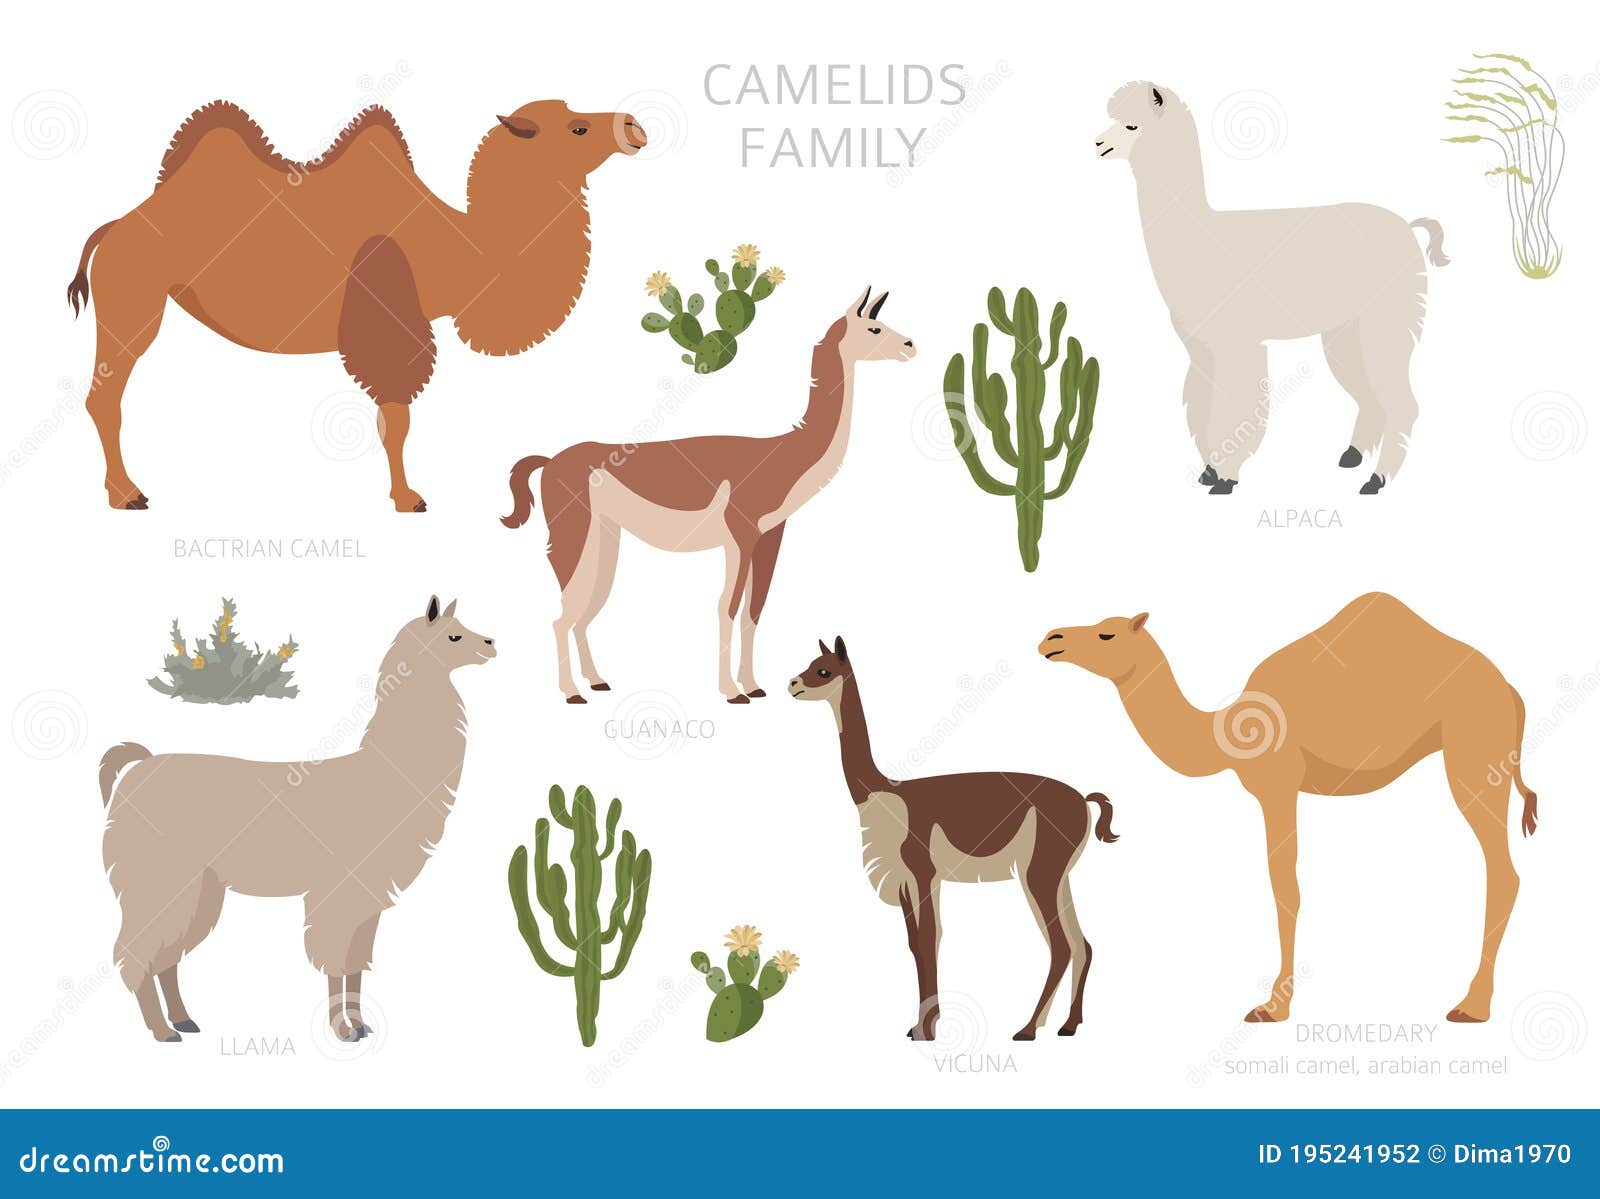 Camelids Family Collection. Camels and Llama Infographic Design Stock ...